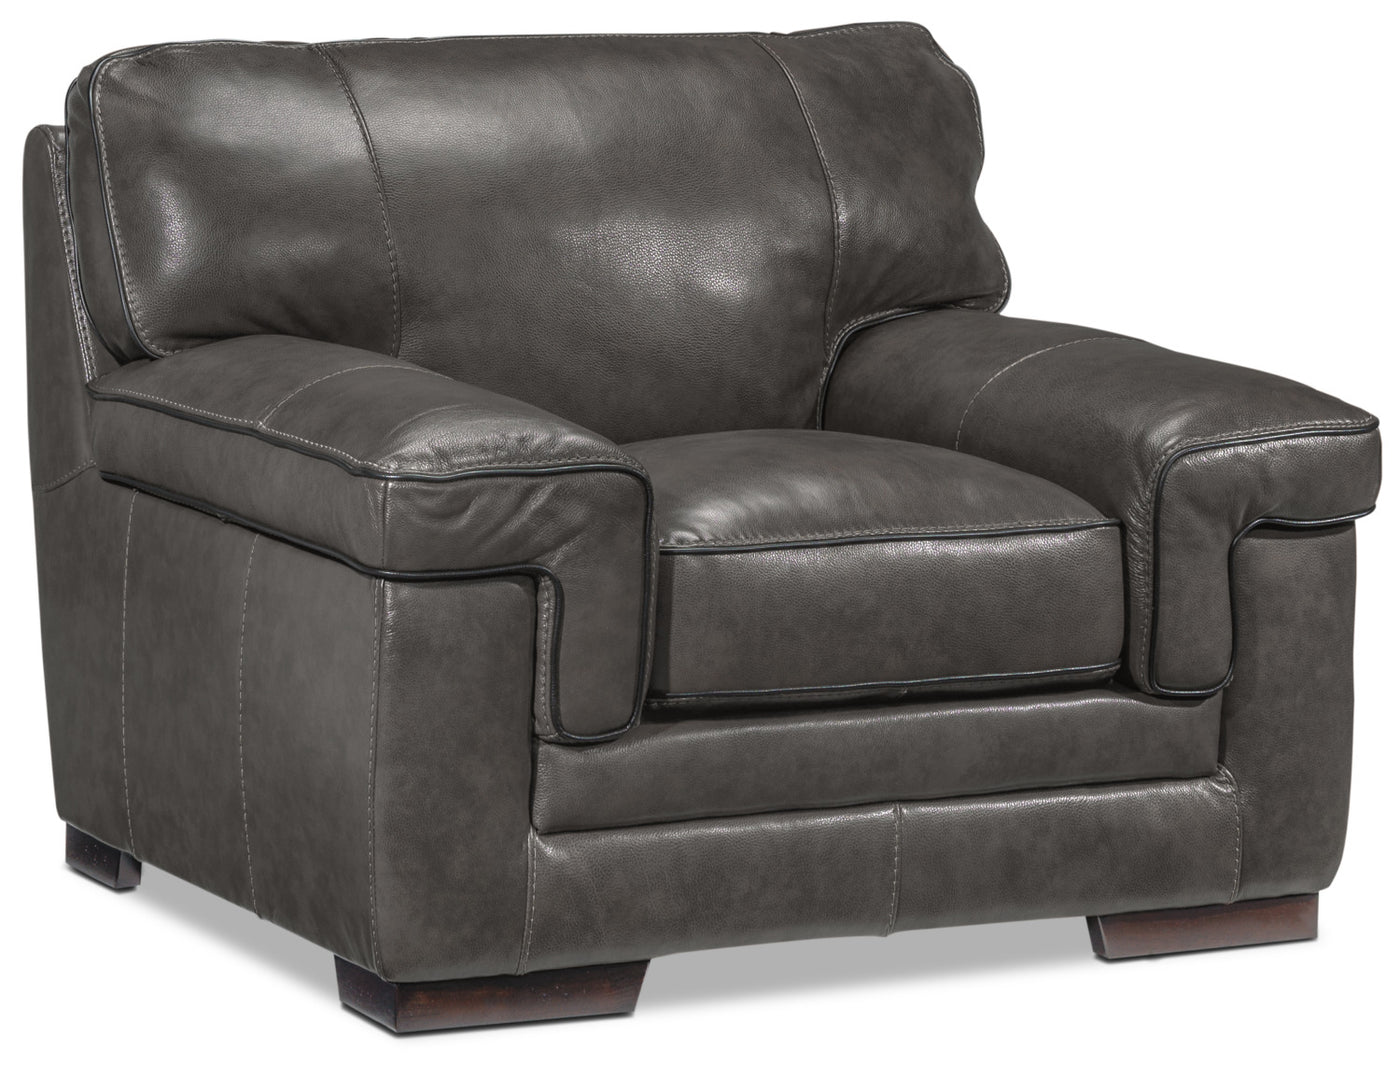 Stampede Leather Chair - Charcoal